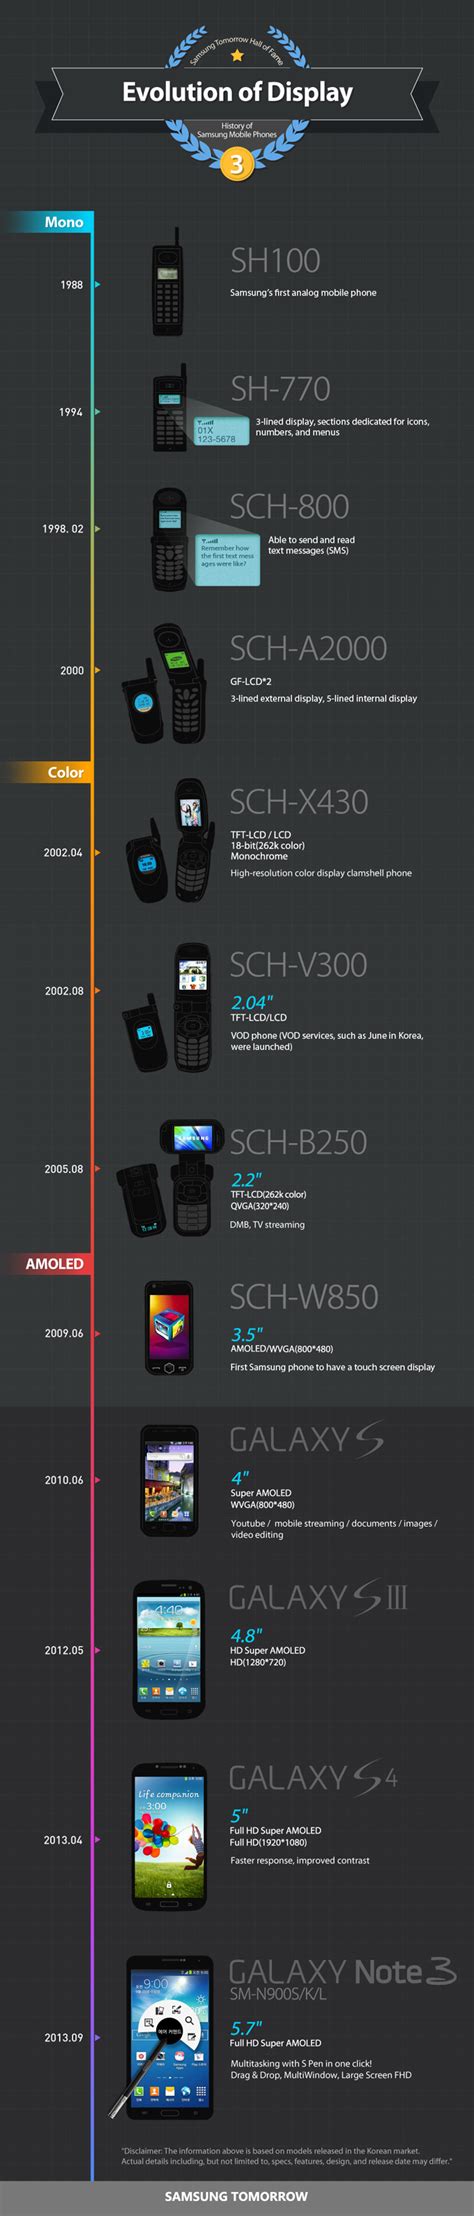 Infographic History Of Samsung Mobile Phones Evolution Of Display